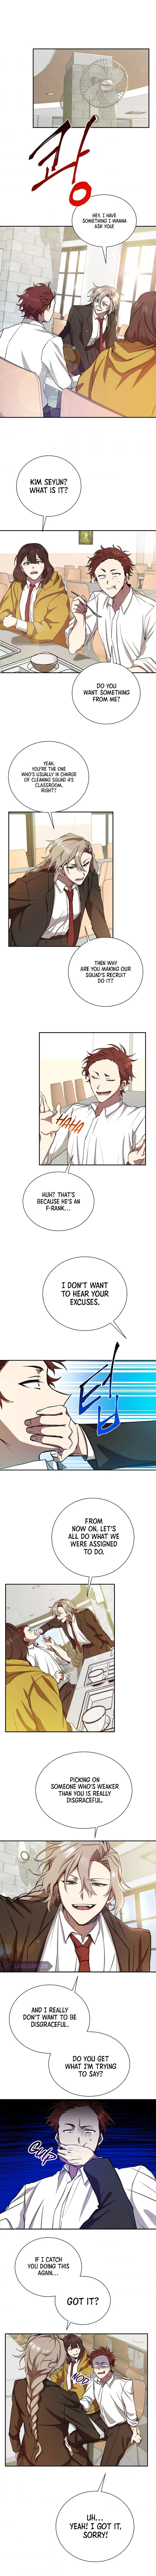 My School Life Pretending To Be a Worthless Person - Chapter 10 Page 5